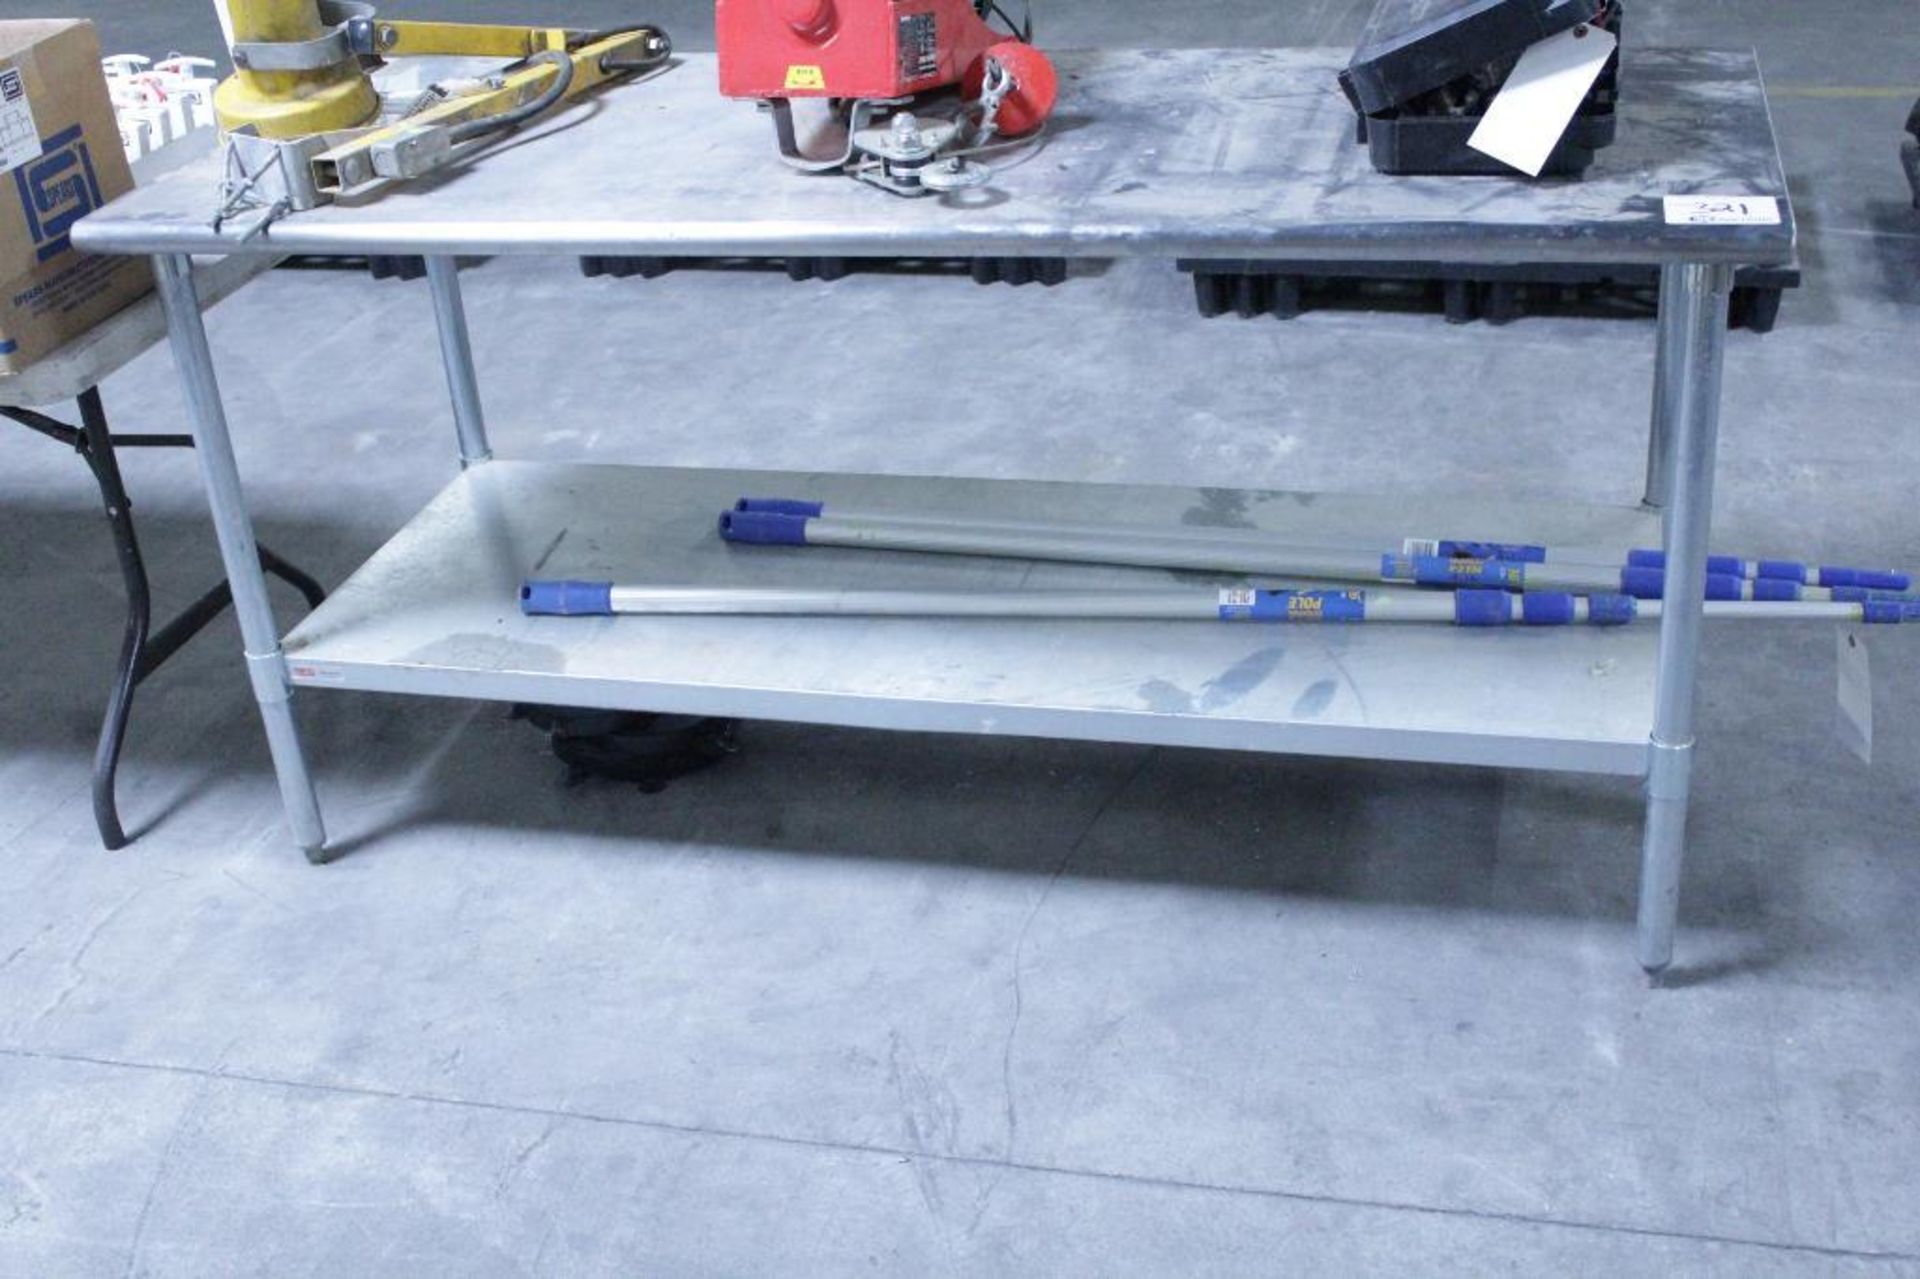 Stainless table